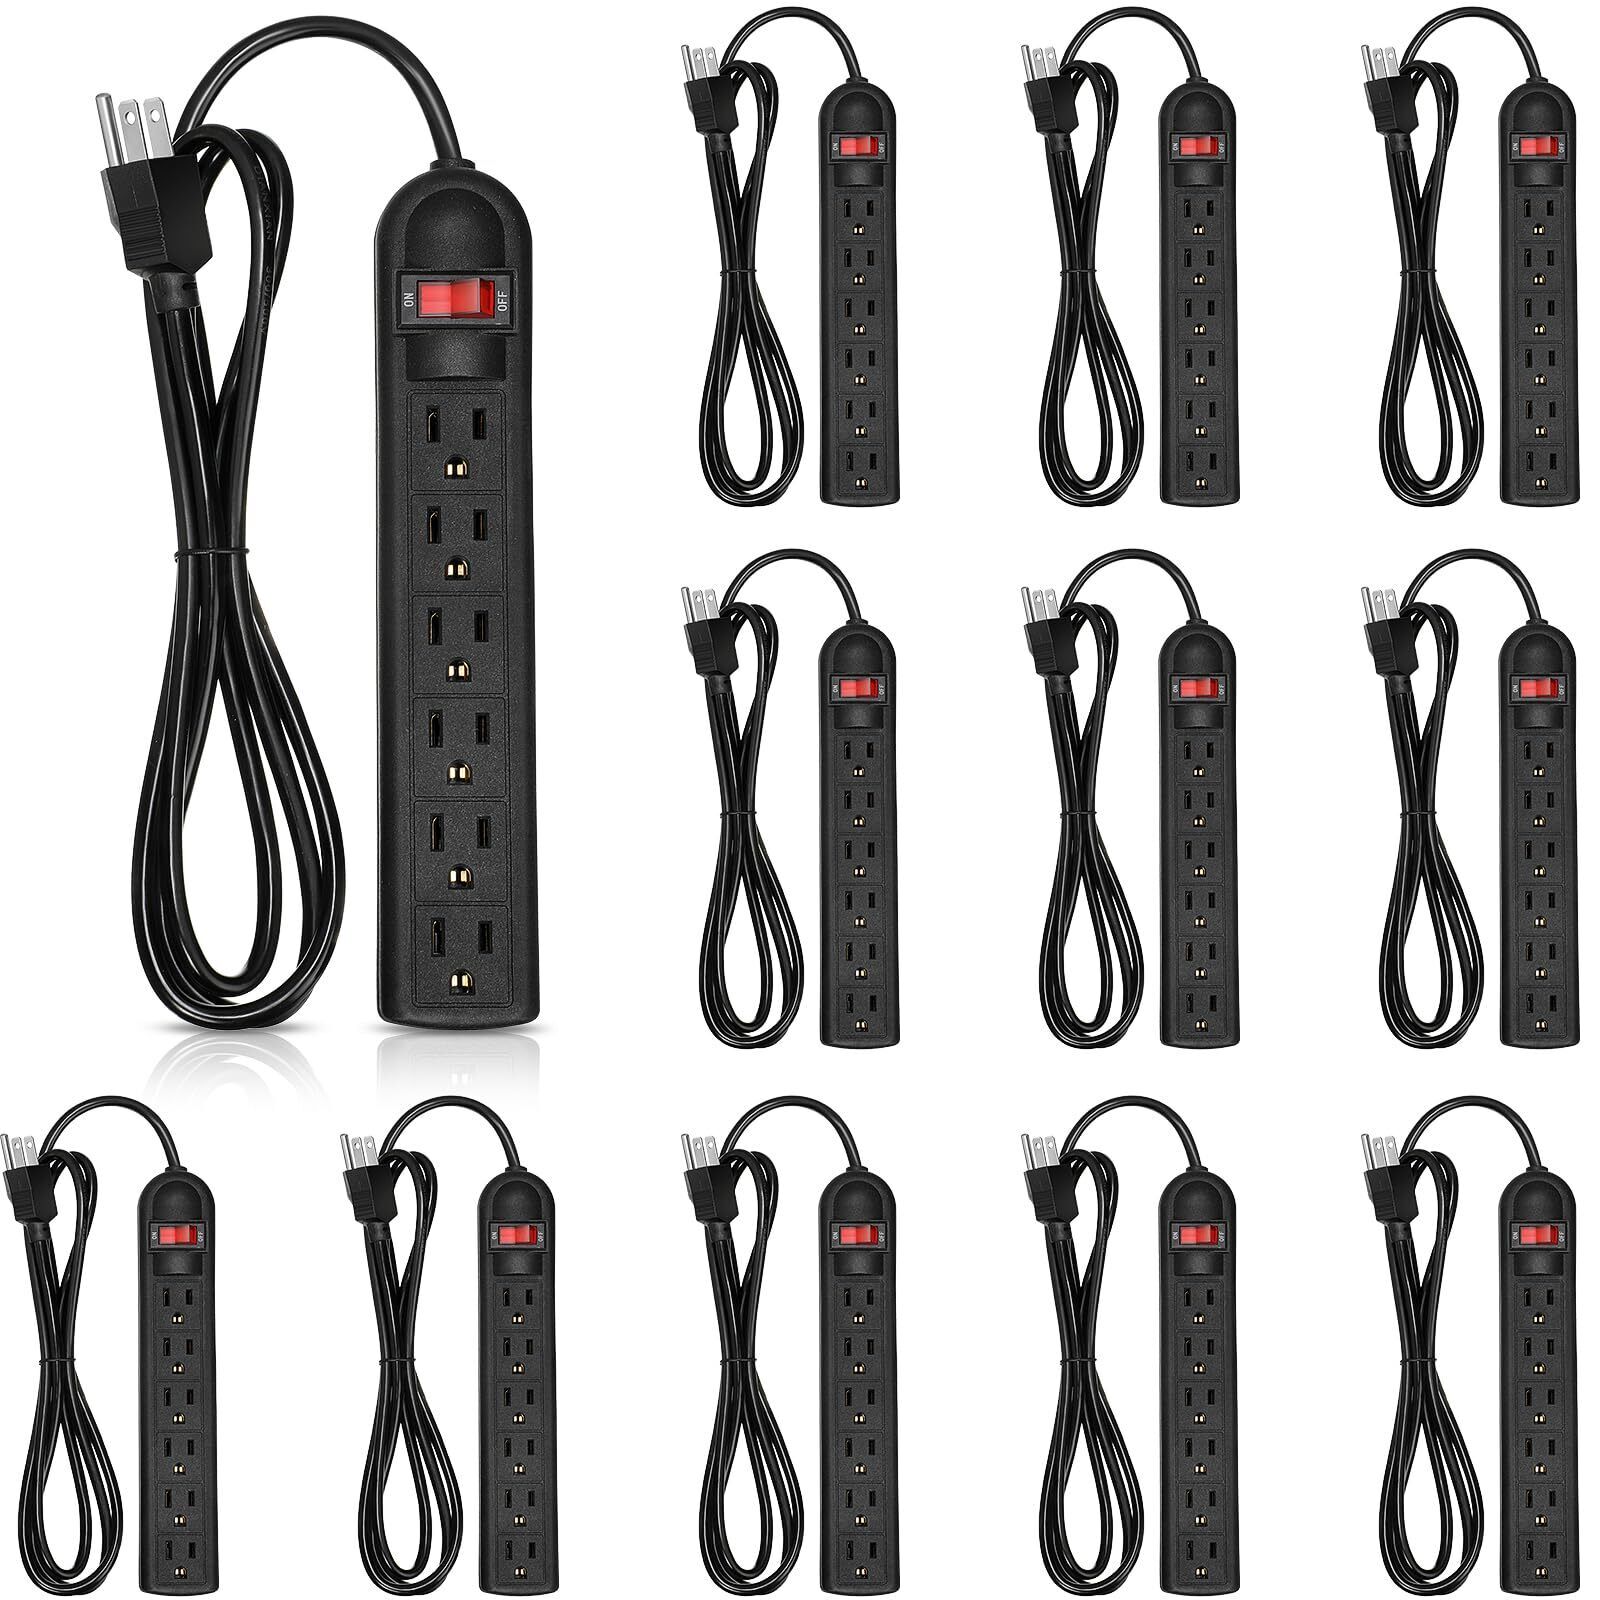 Kanayu 12 Pack 6 Outlet Surge Protector 6 ft Long Electrical Extension Black 